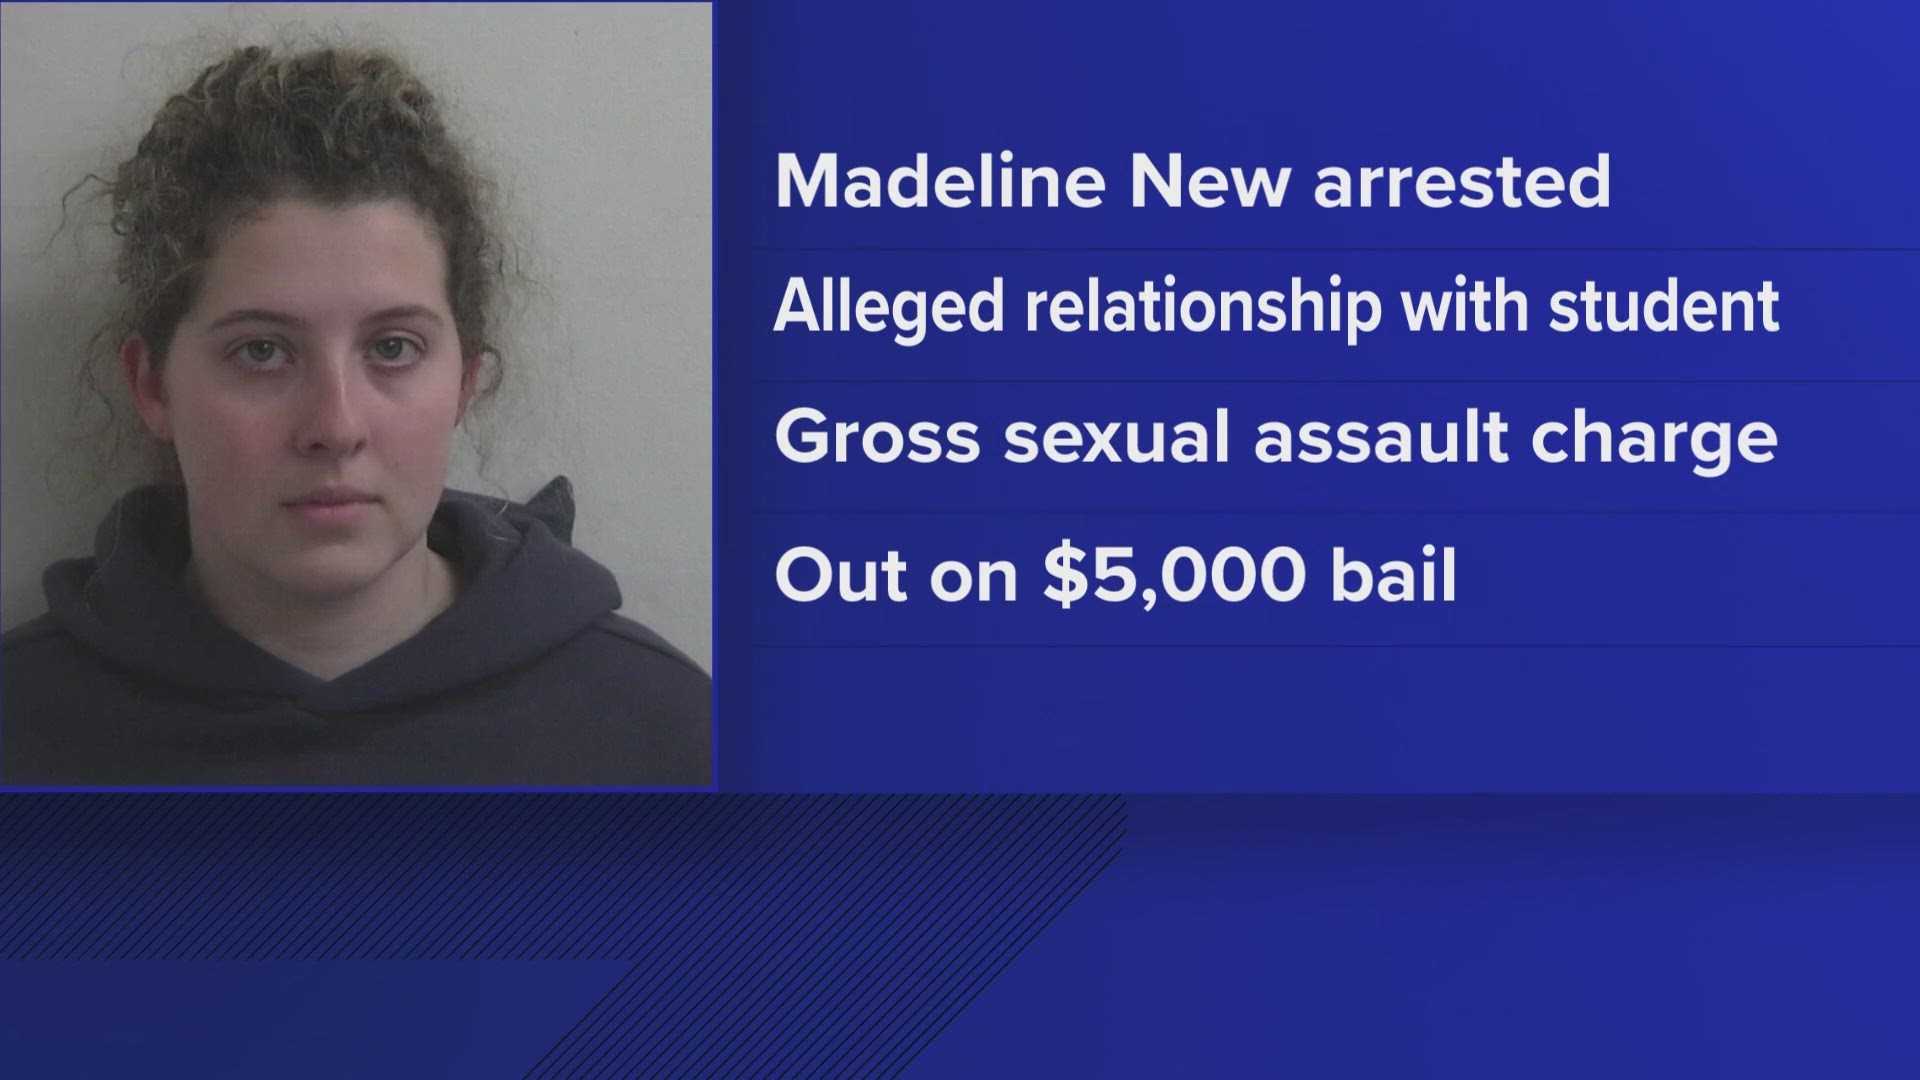 The 24-year-old Oxford County woman was arrested and charged with gross sexual assault and furnishing schedule drugs, the release stated.